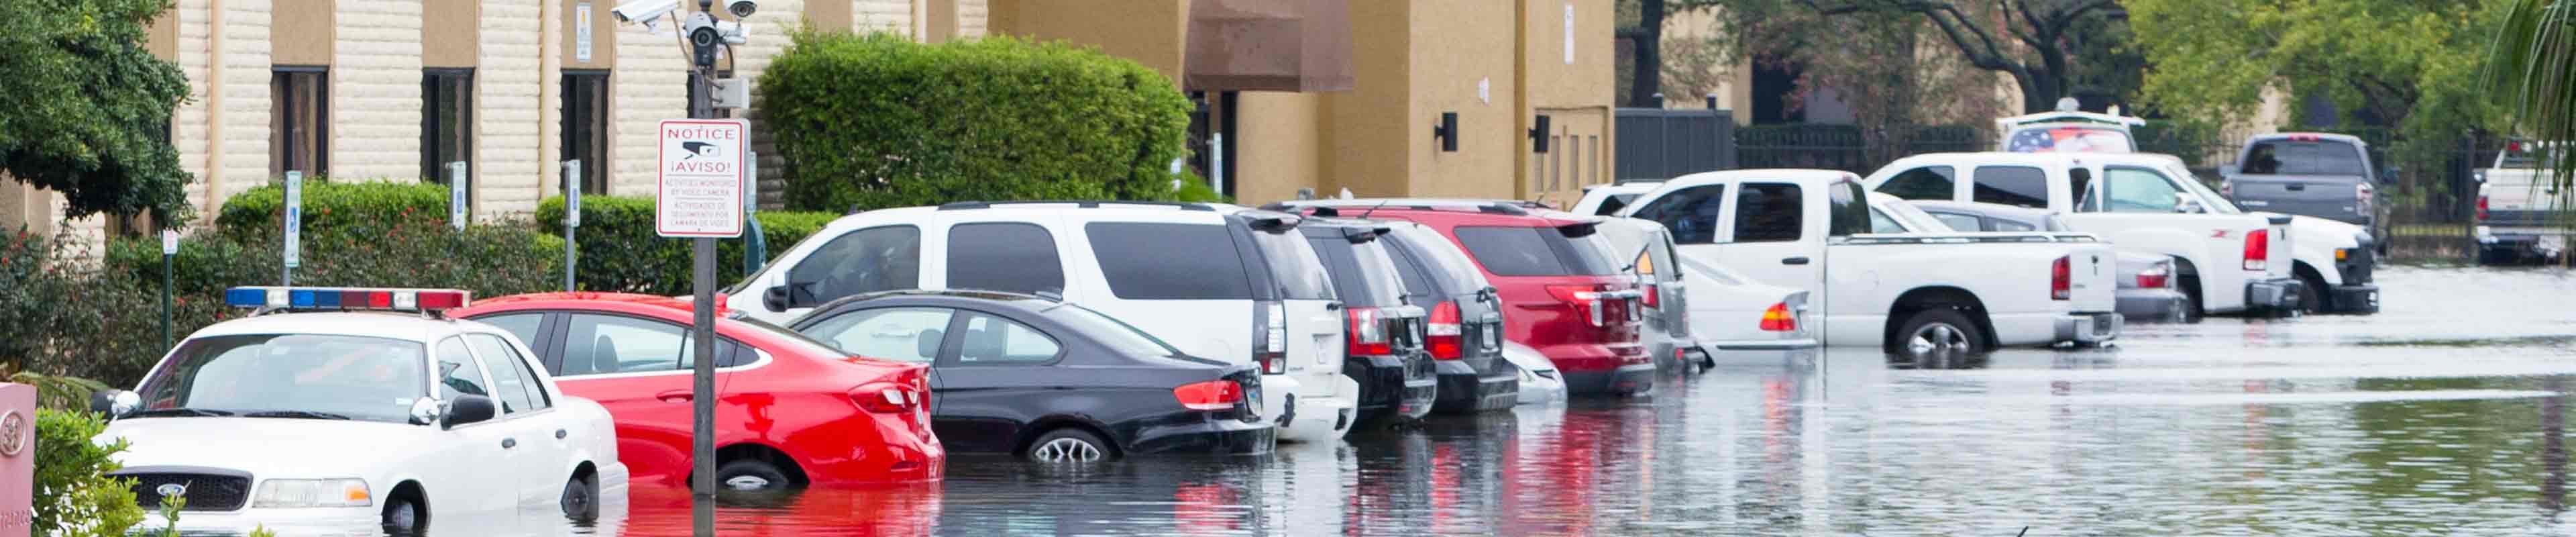 Image of parked cars flooded in a lot.